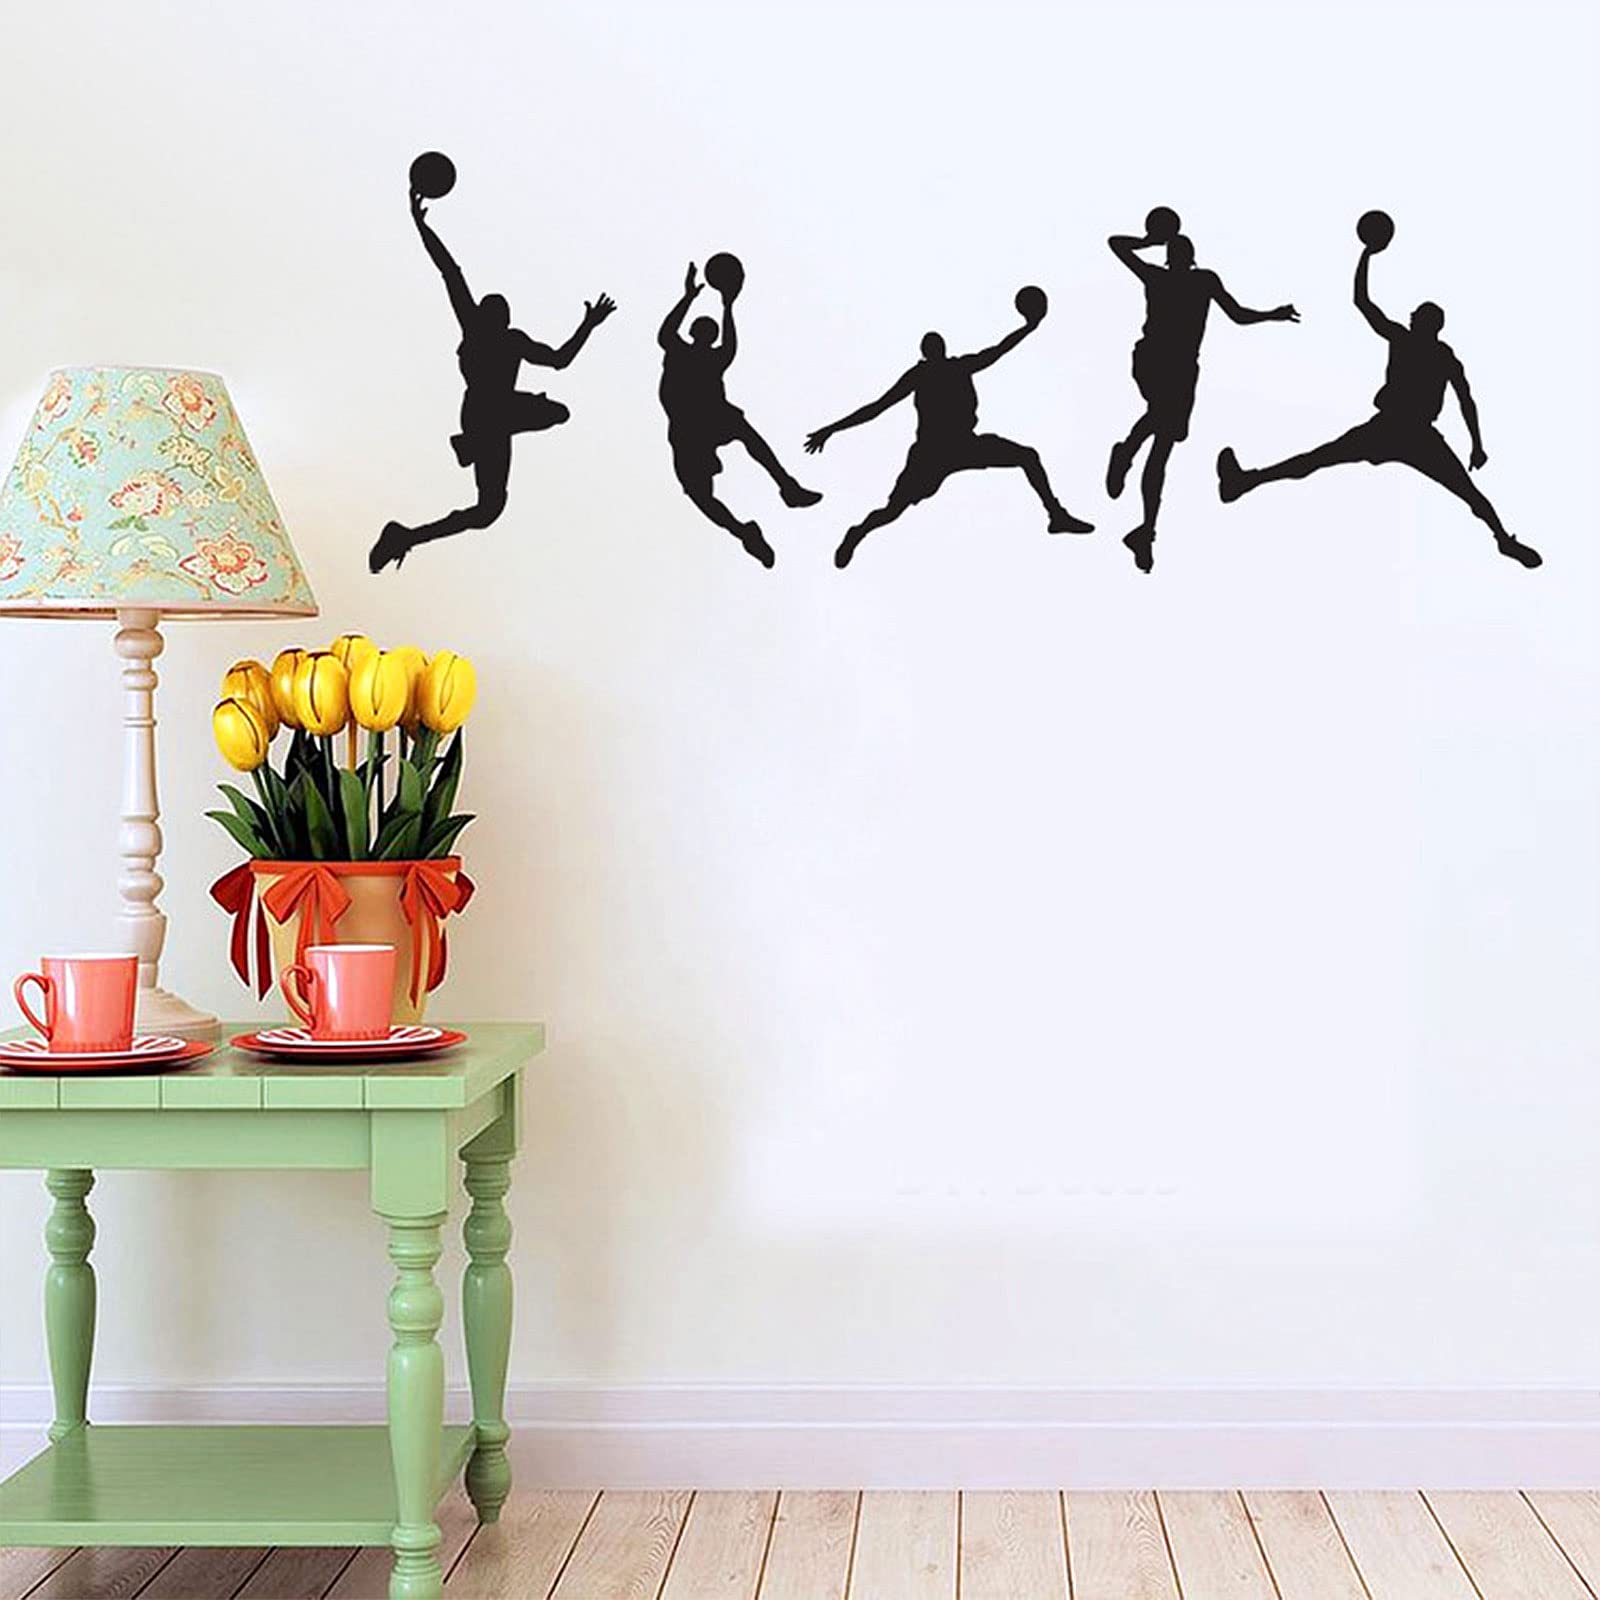 Basketball Players Wall Decals Slam Dunk DIY Wall Stickers for Kids Room Boys Bedroom Home Wall Decorations (5 pcs)